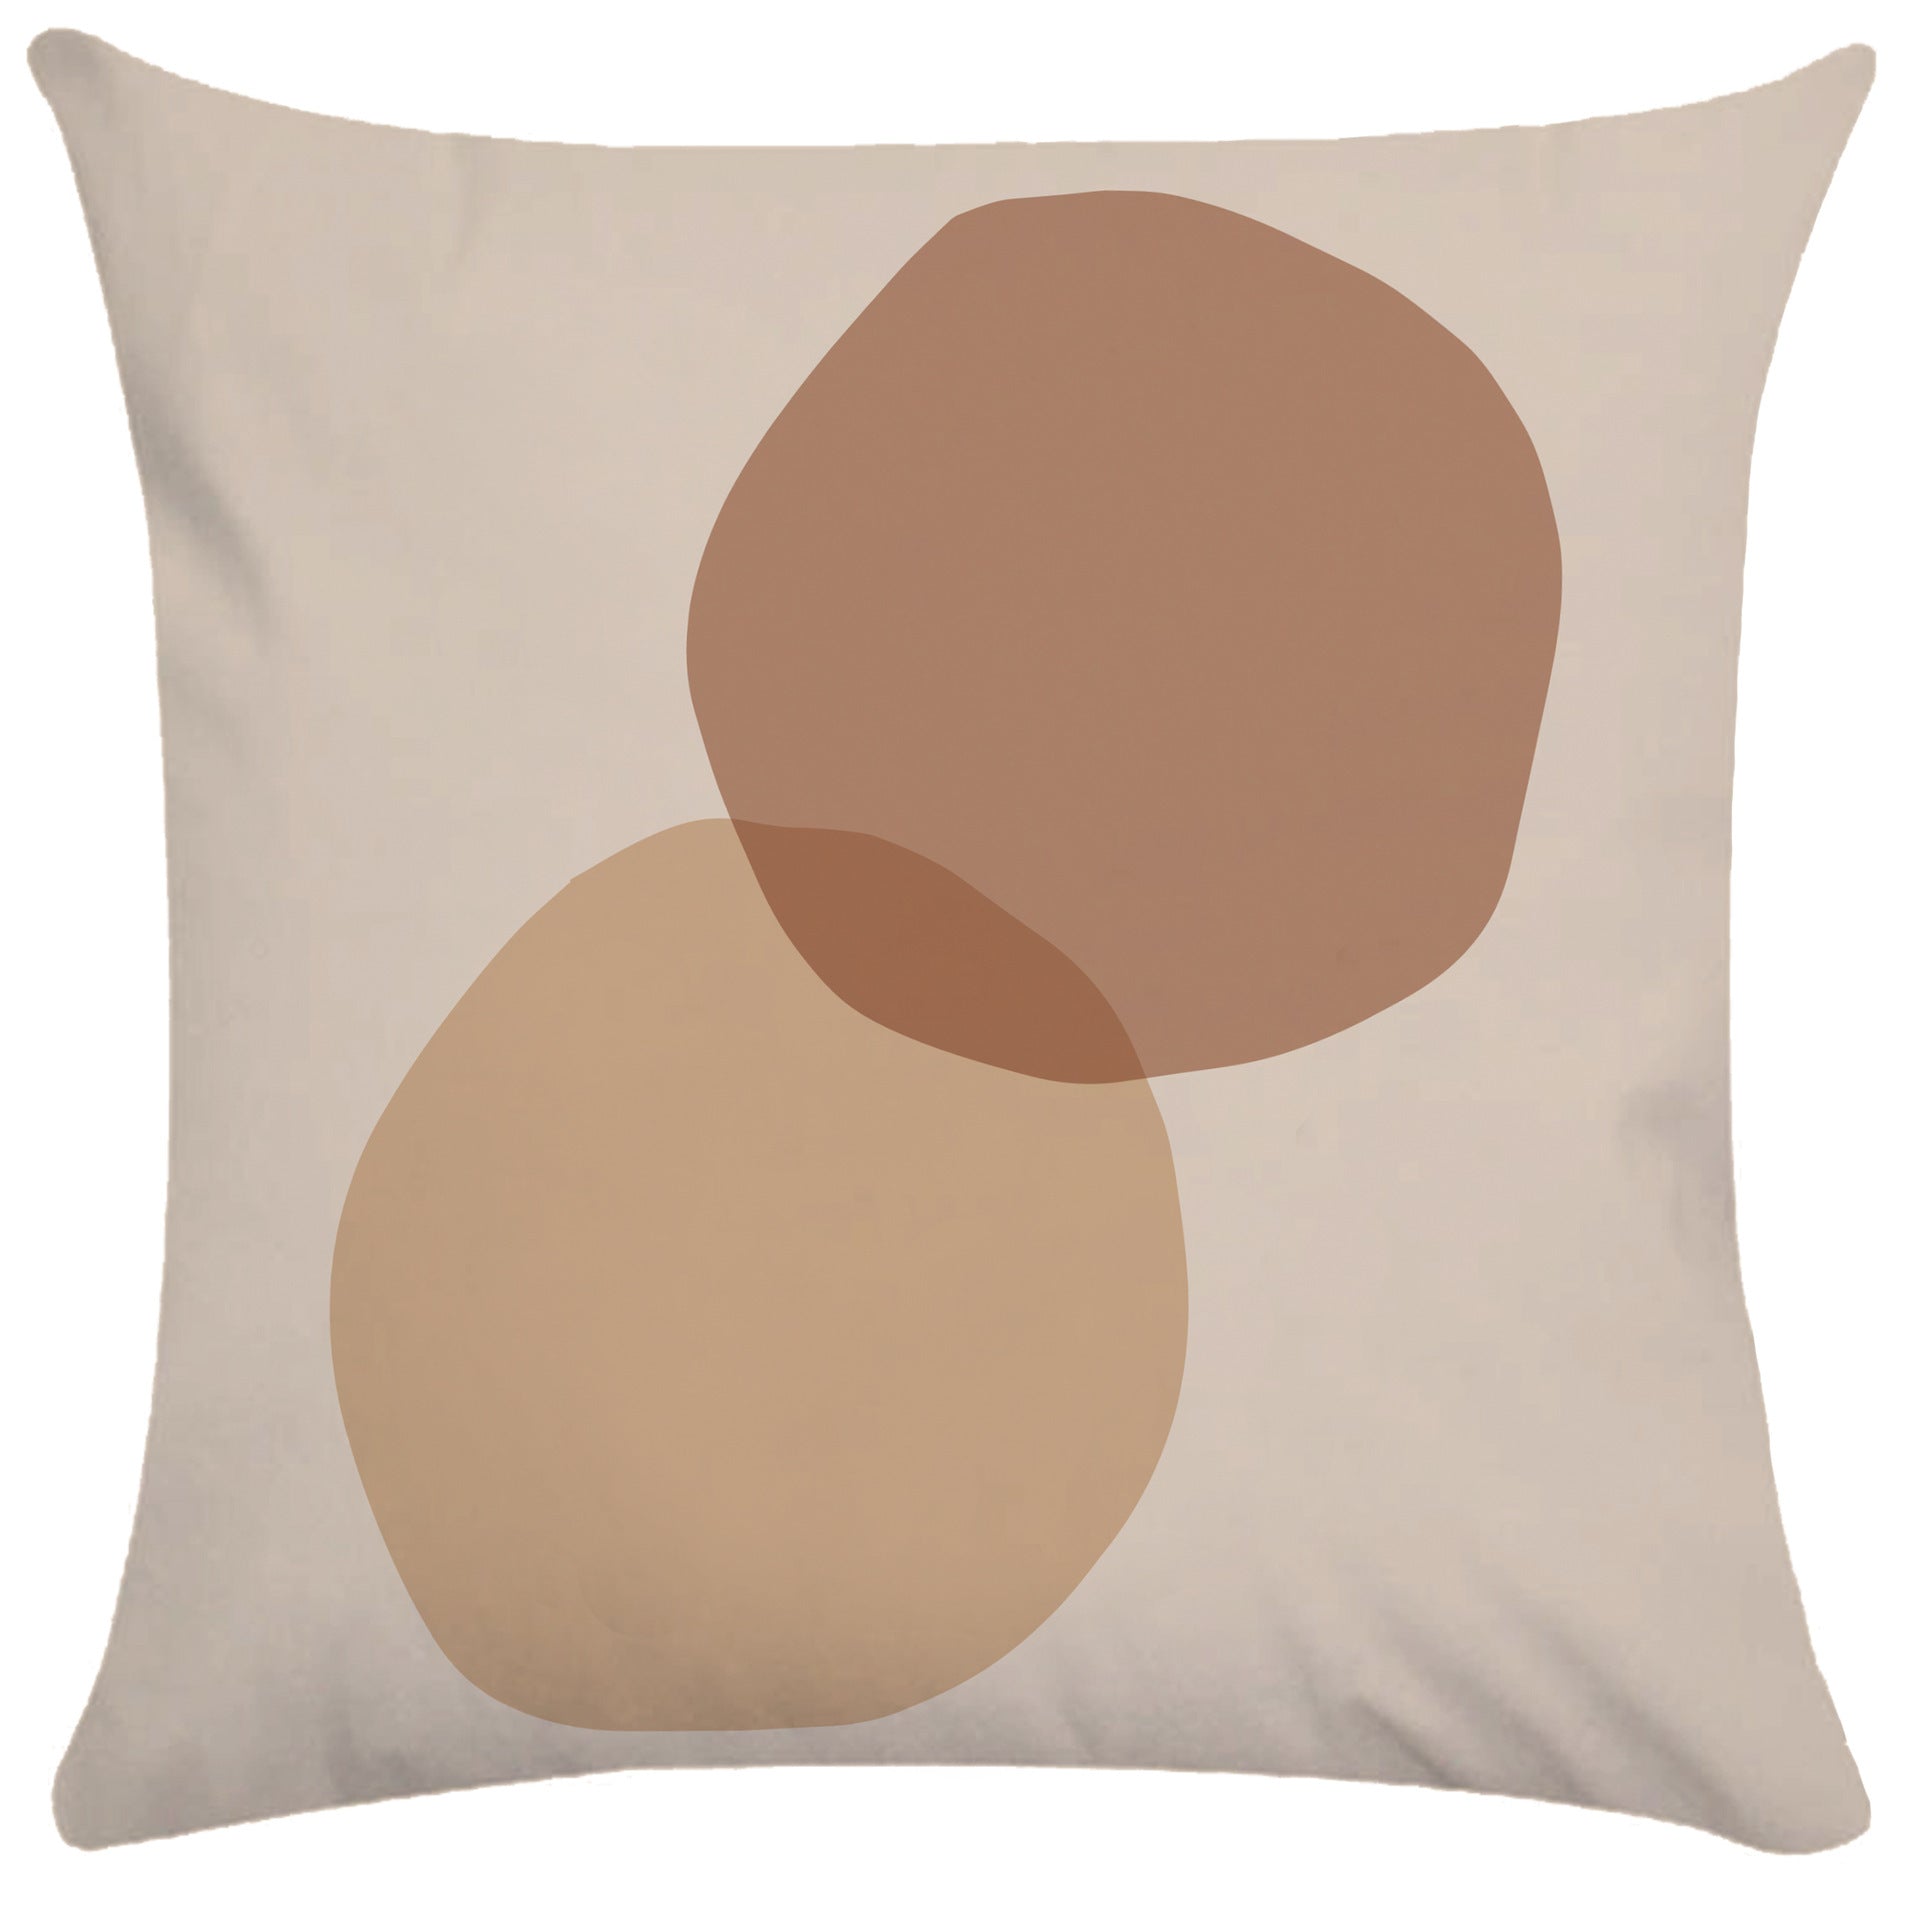 Pillowcase With A Geometric Abstract Design